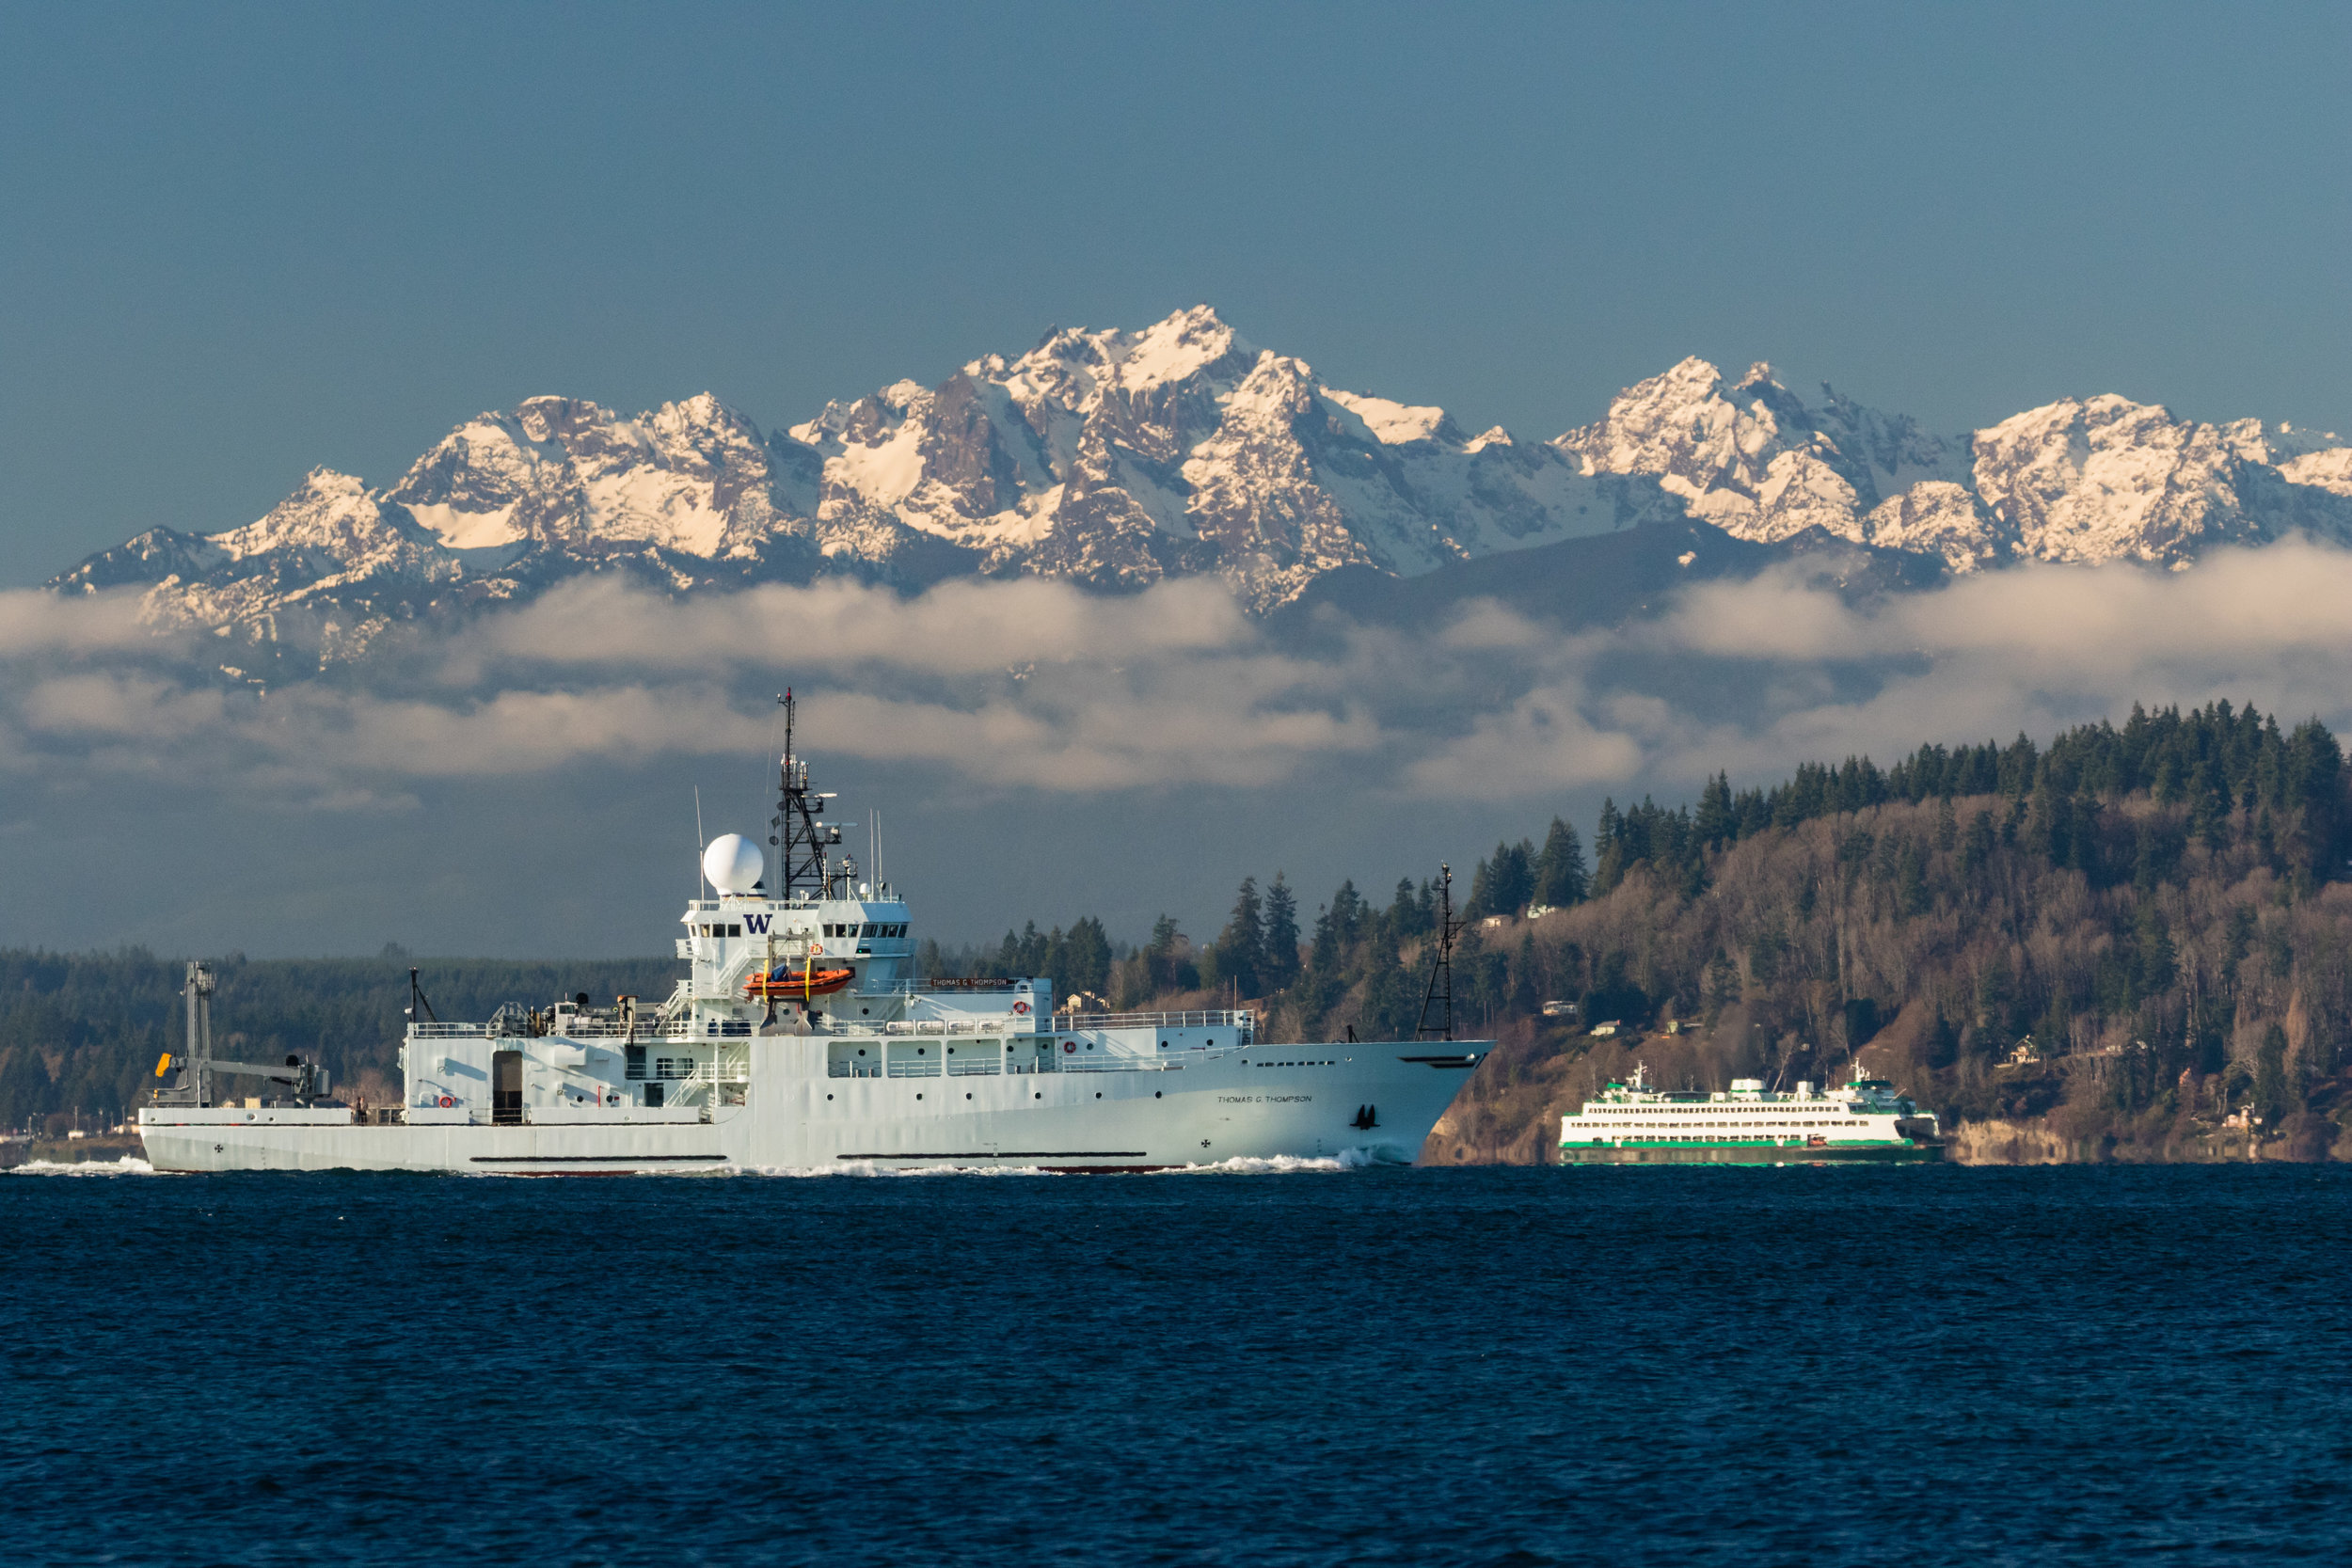 UW Research Ship in Puget Sound.  WA